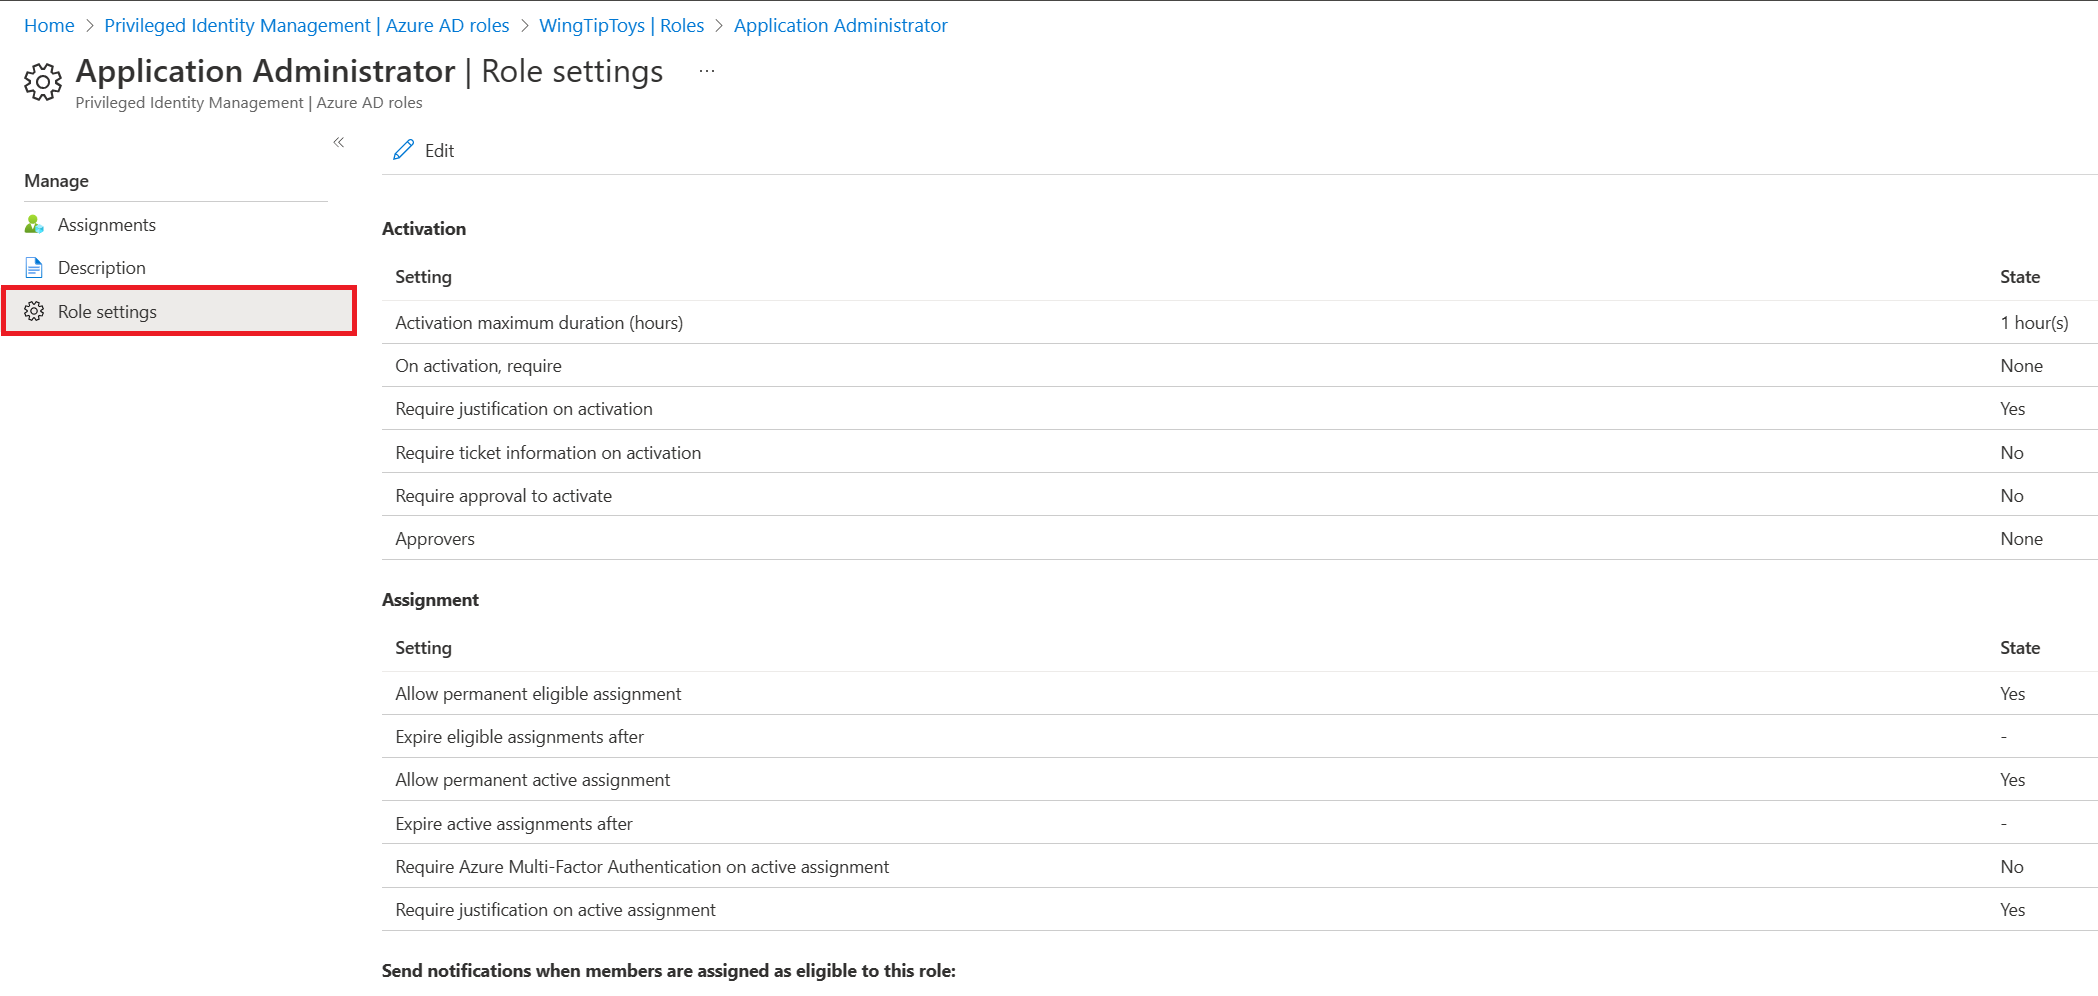 Screenshot of the role settings page with options to update assignment and activation settings.